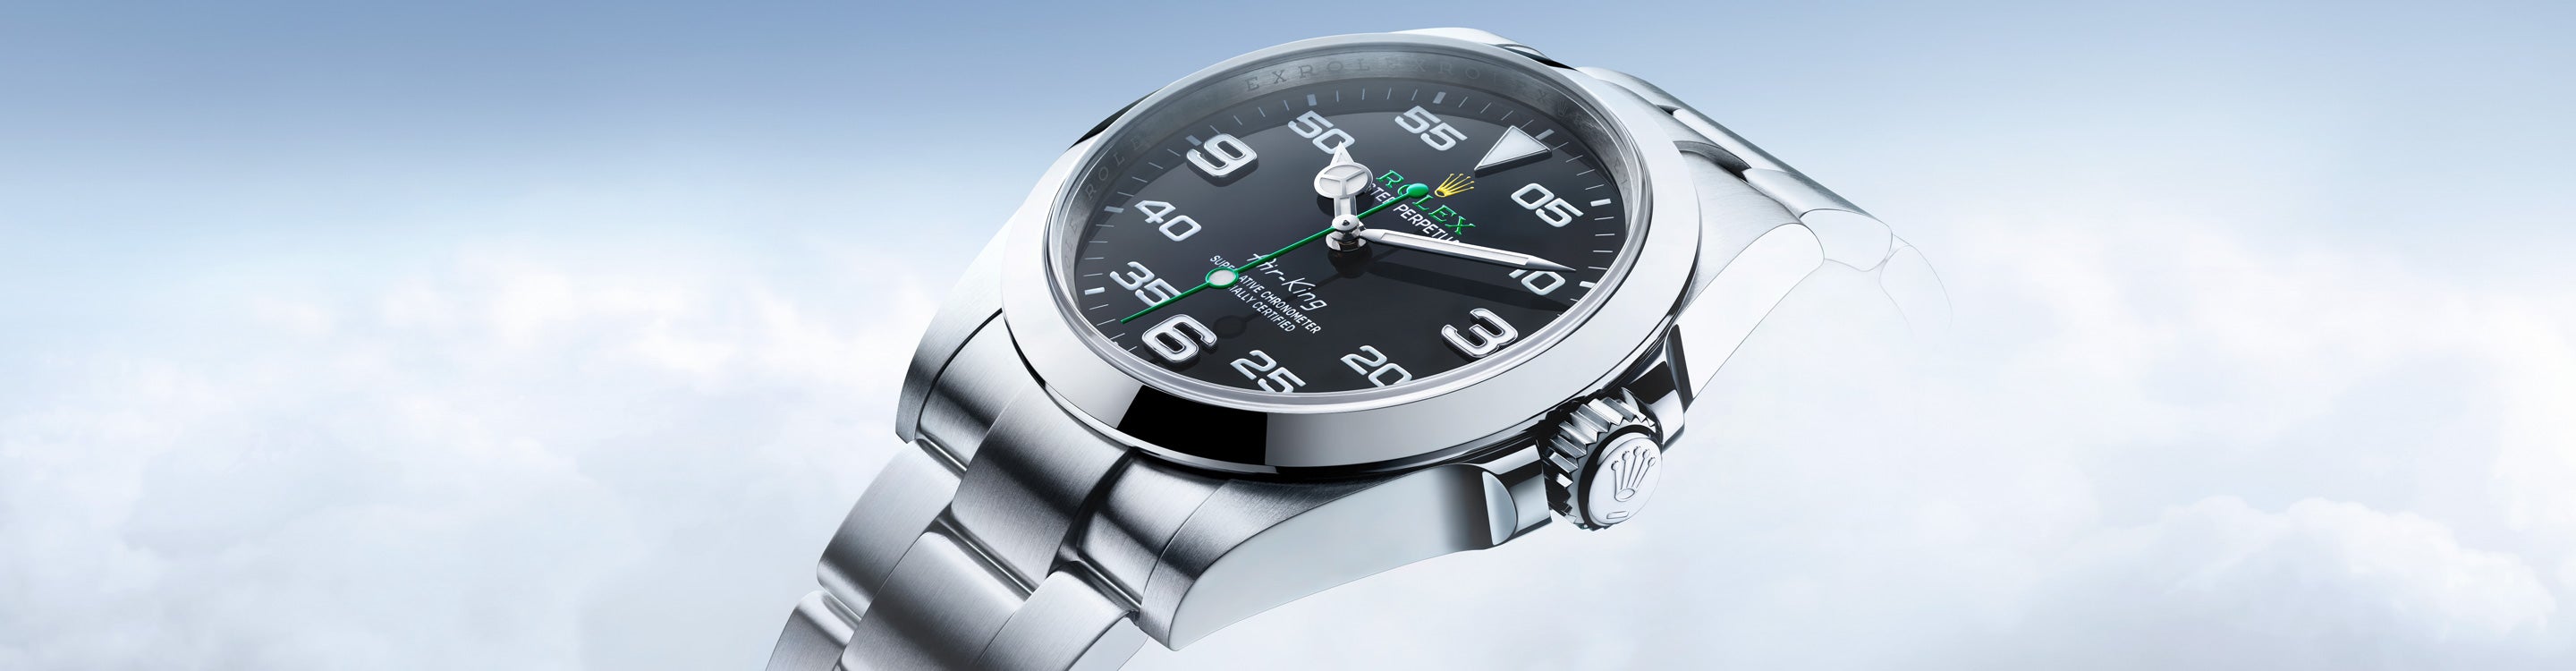 Rolex Air-King in Clouds at Fink's Jewelers